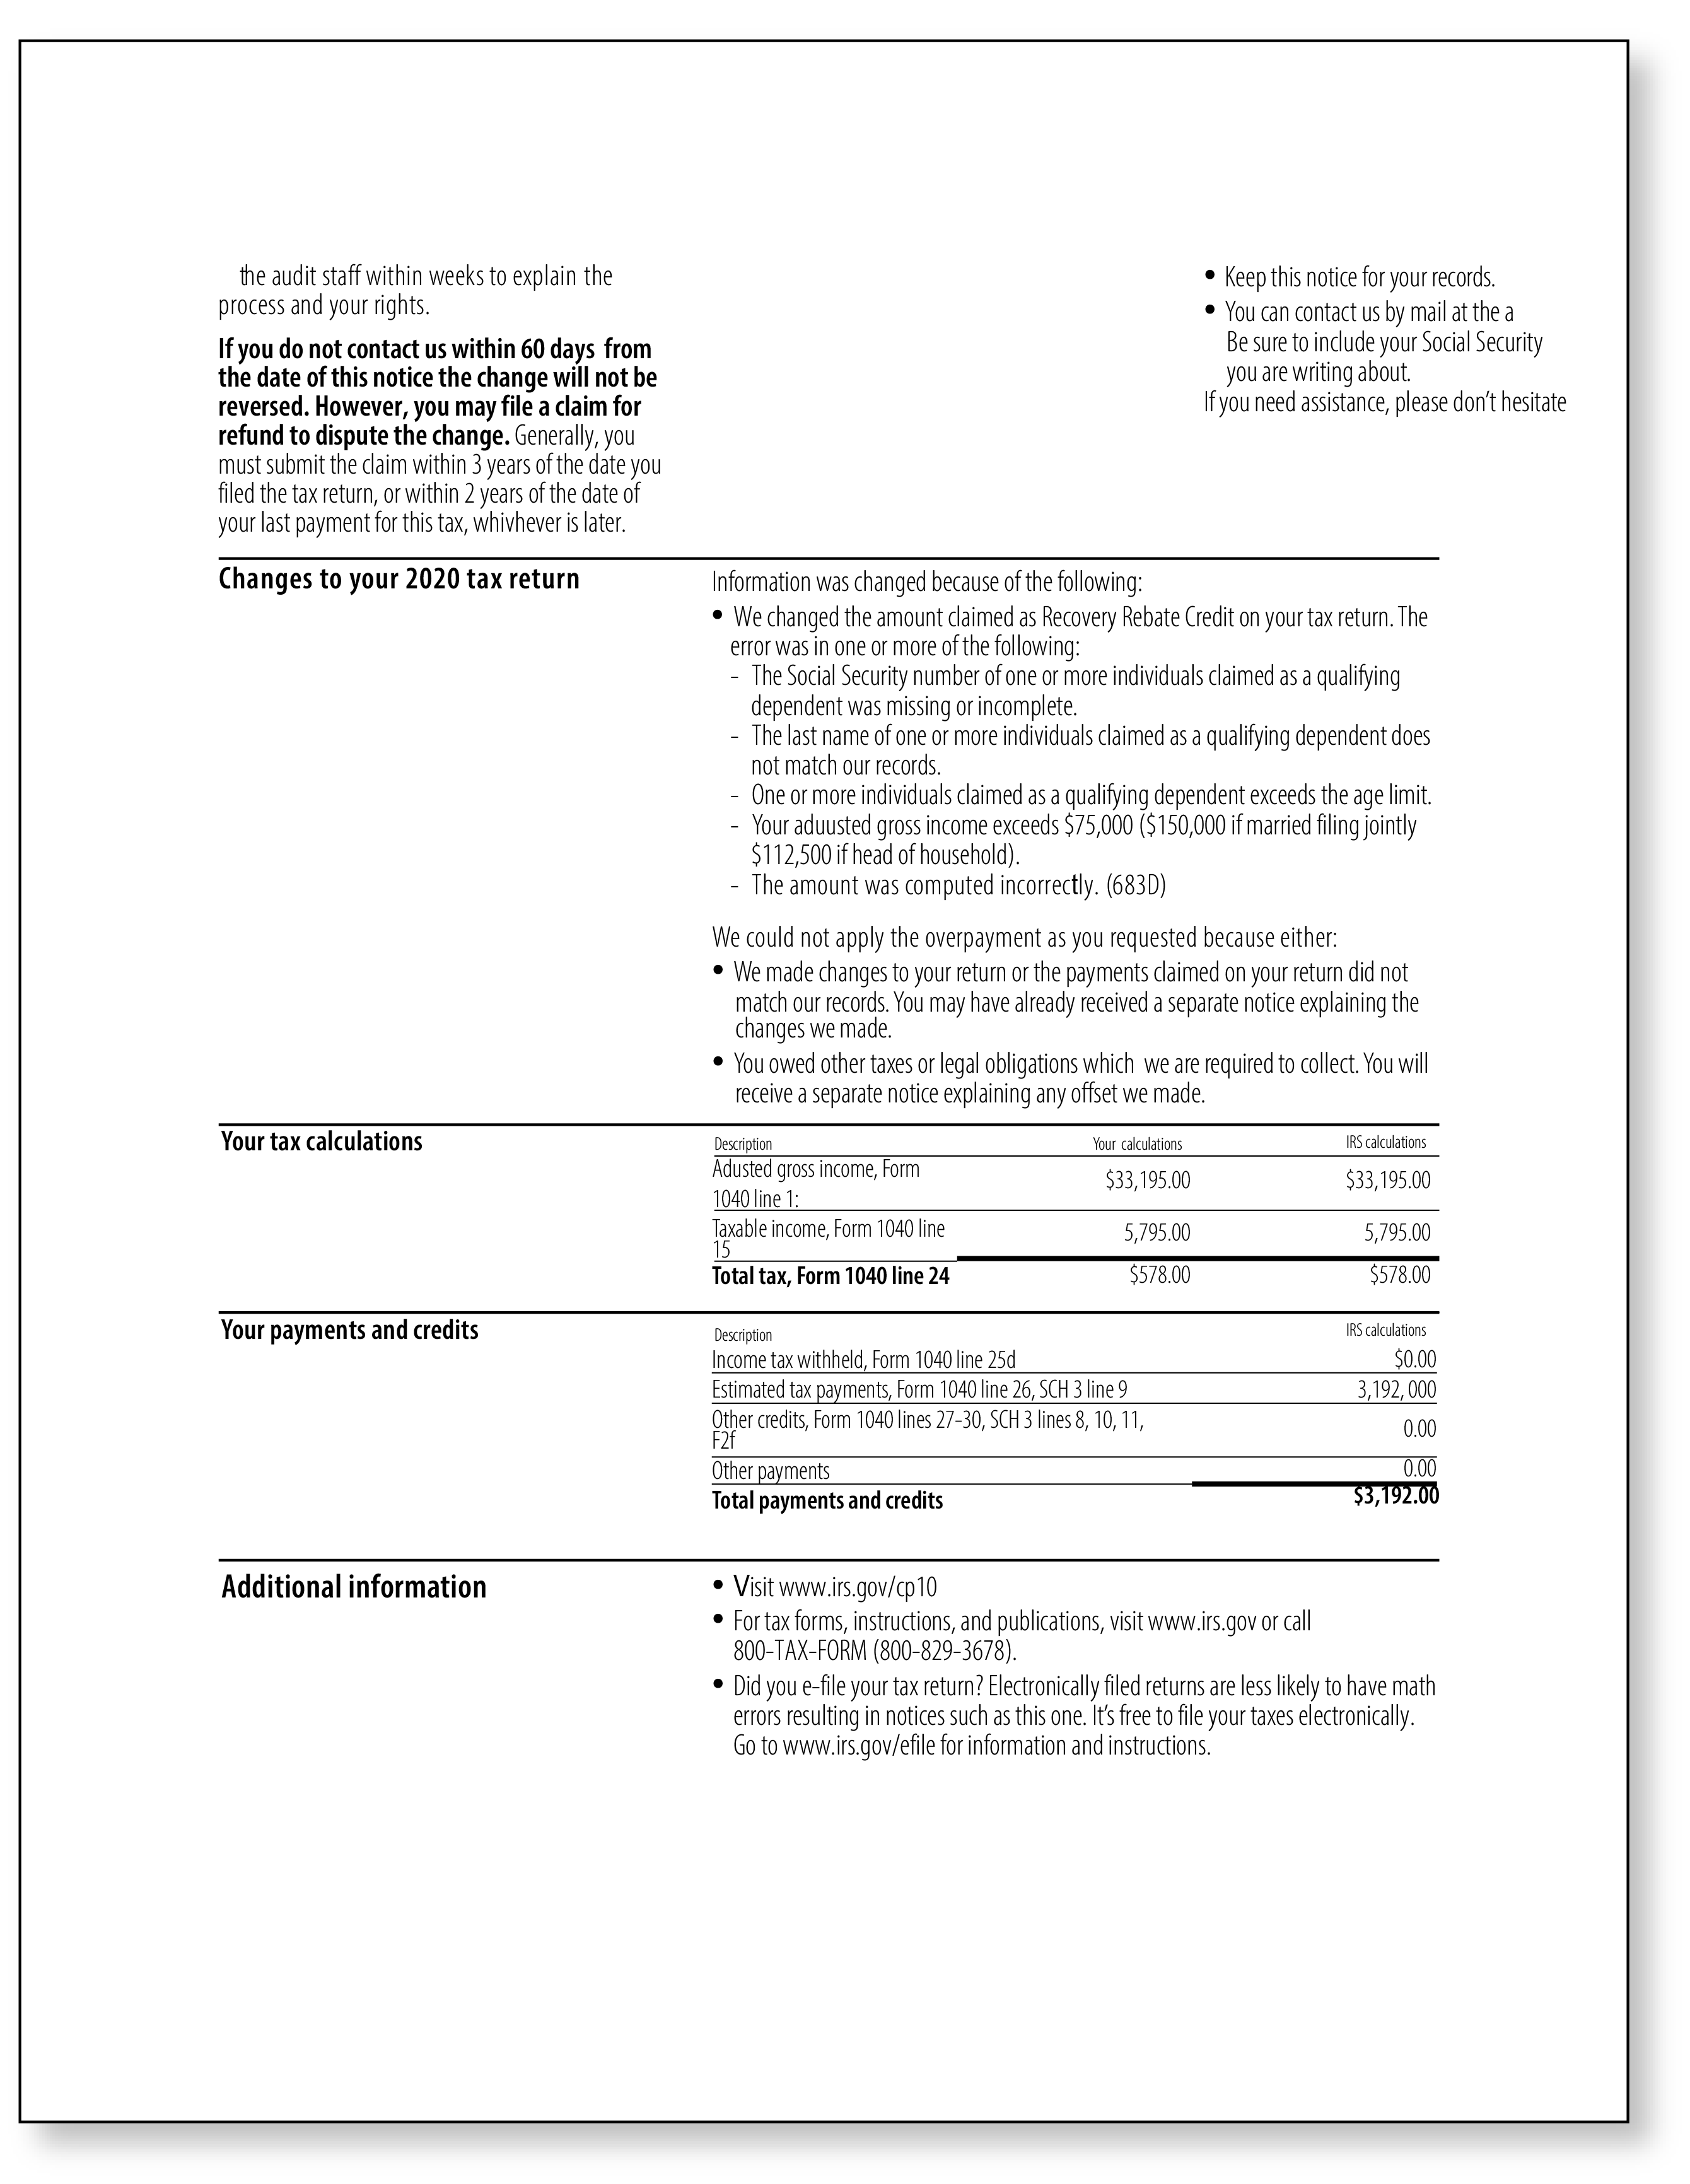 IRS Audit Letter CP10 – Sample 1